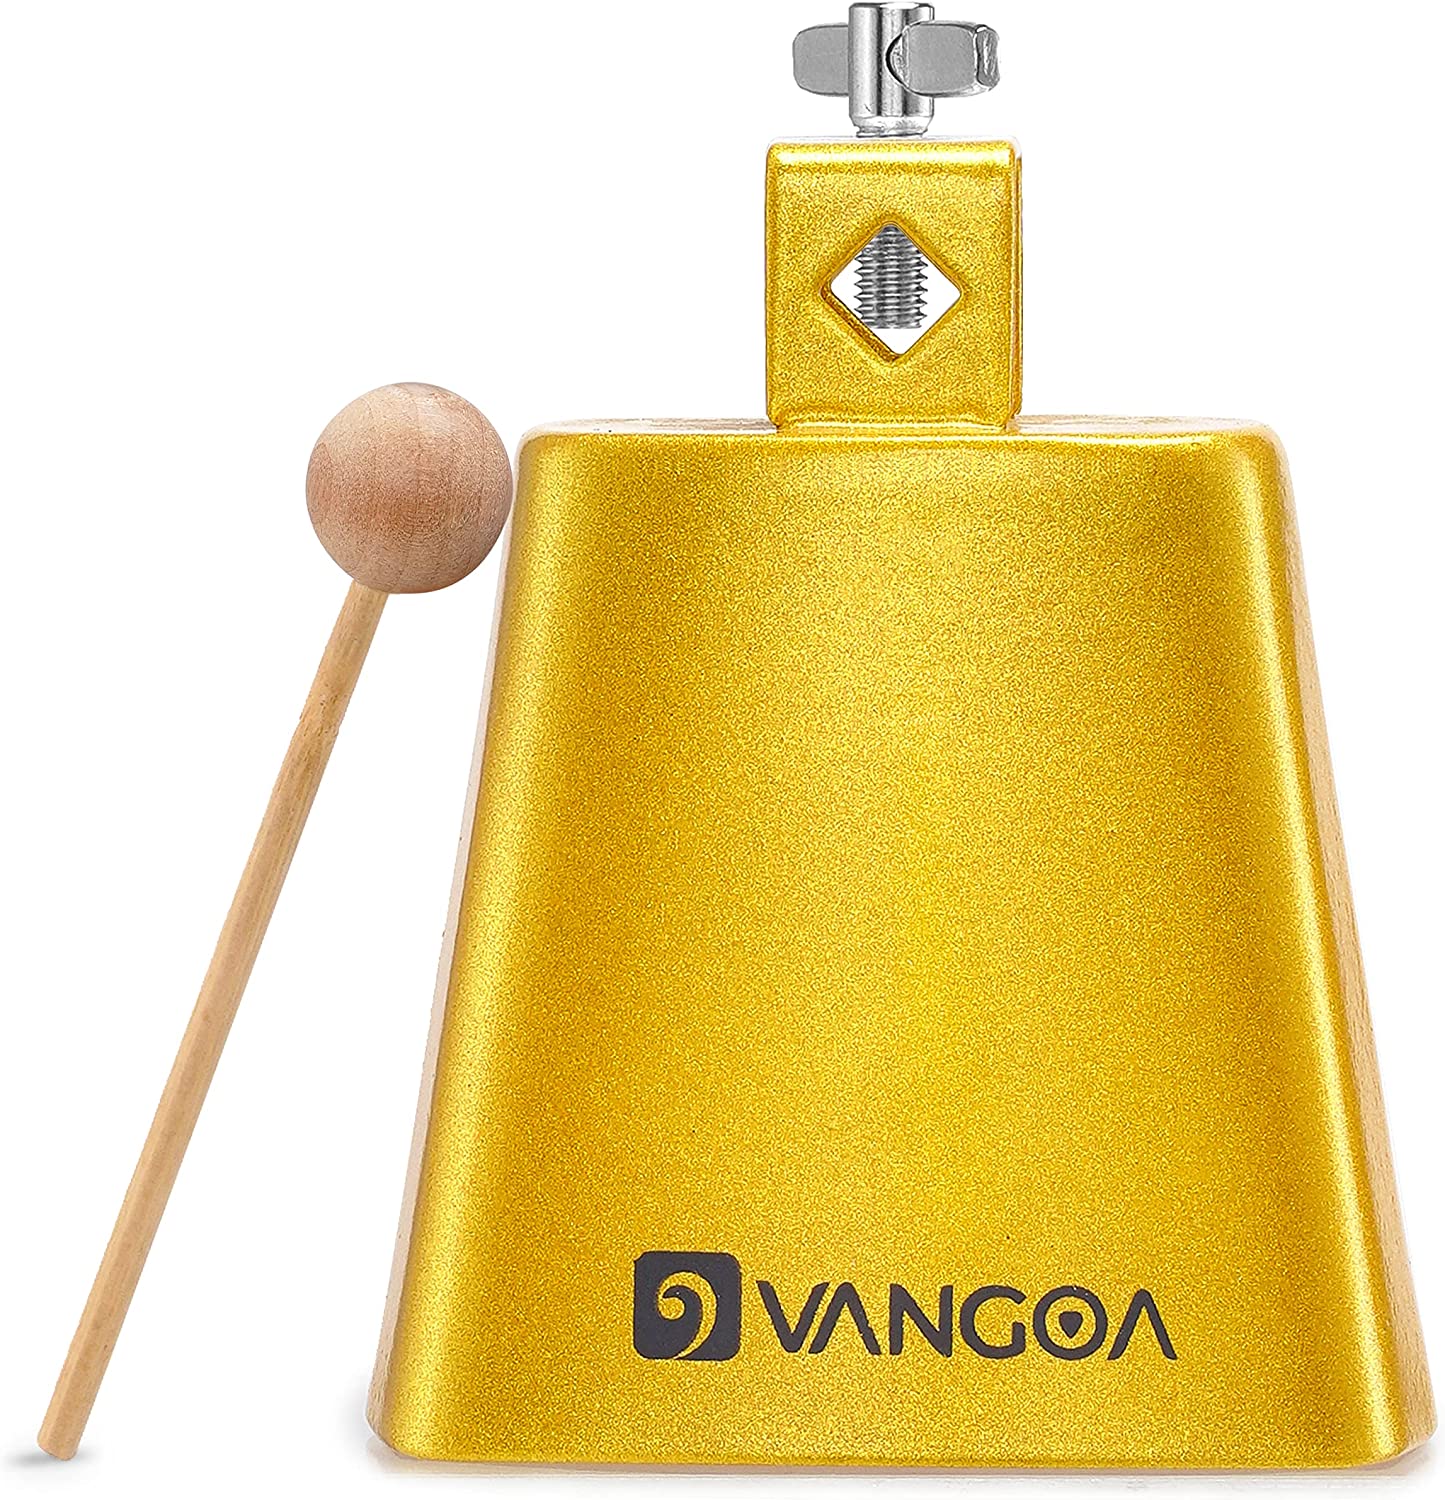 available on ]Vangoa 5 Inch Cow Bell With Mallet Beater Sticks